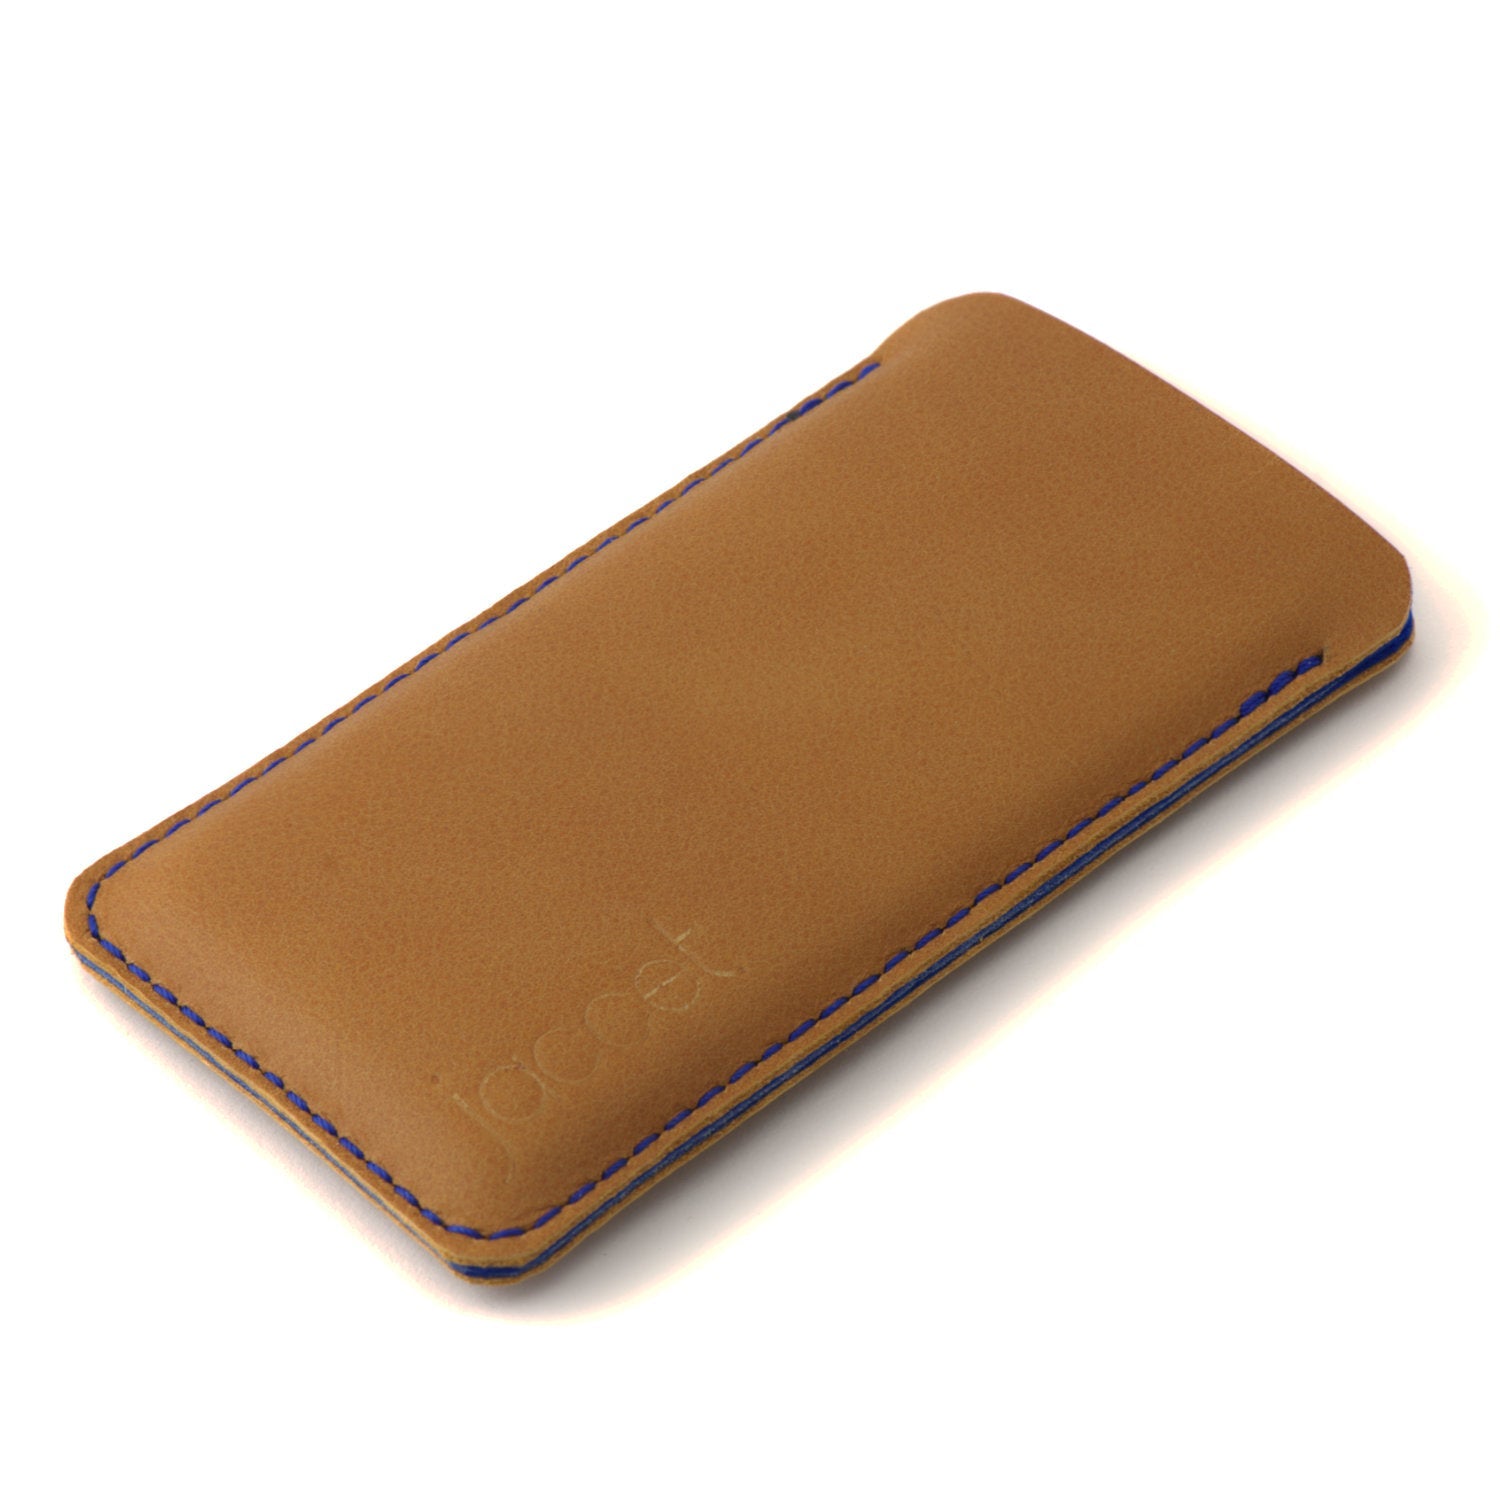 JACCET leather Sony Xperia sleeve - Cognac color leather with blue wool felt - 100% Handmade